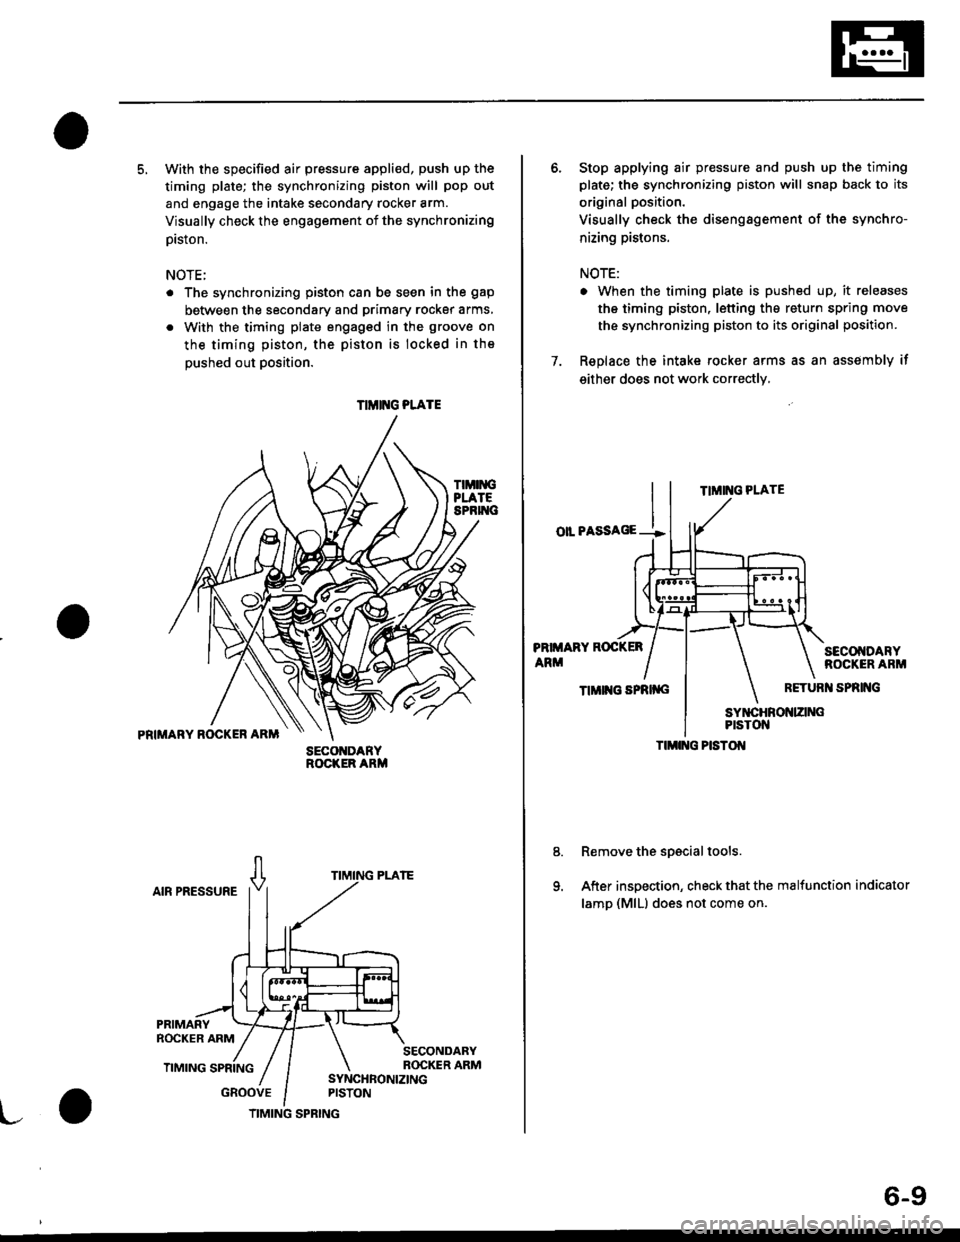 HONDA CIVIC 1997 6.G Workshop Manual 5. With the specified air pressure appli€d, push up the
timing plate; the synchronizing piston will pop out
and engage the intake secondary rocker arm.
Visually check the engagement of the synchroni